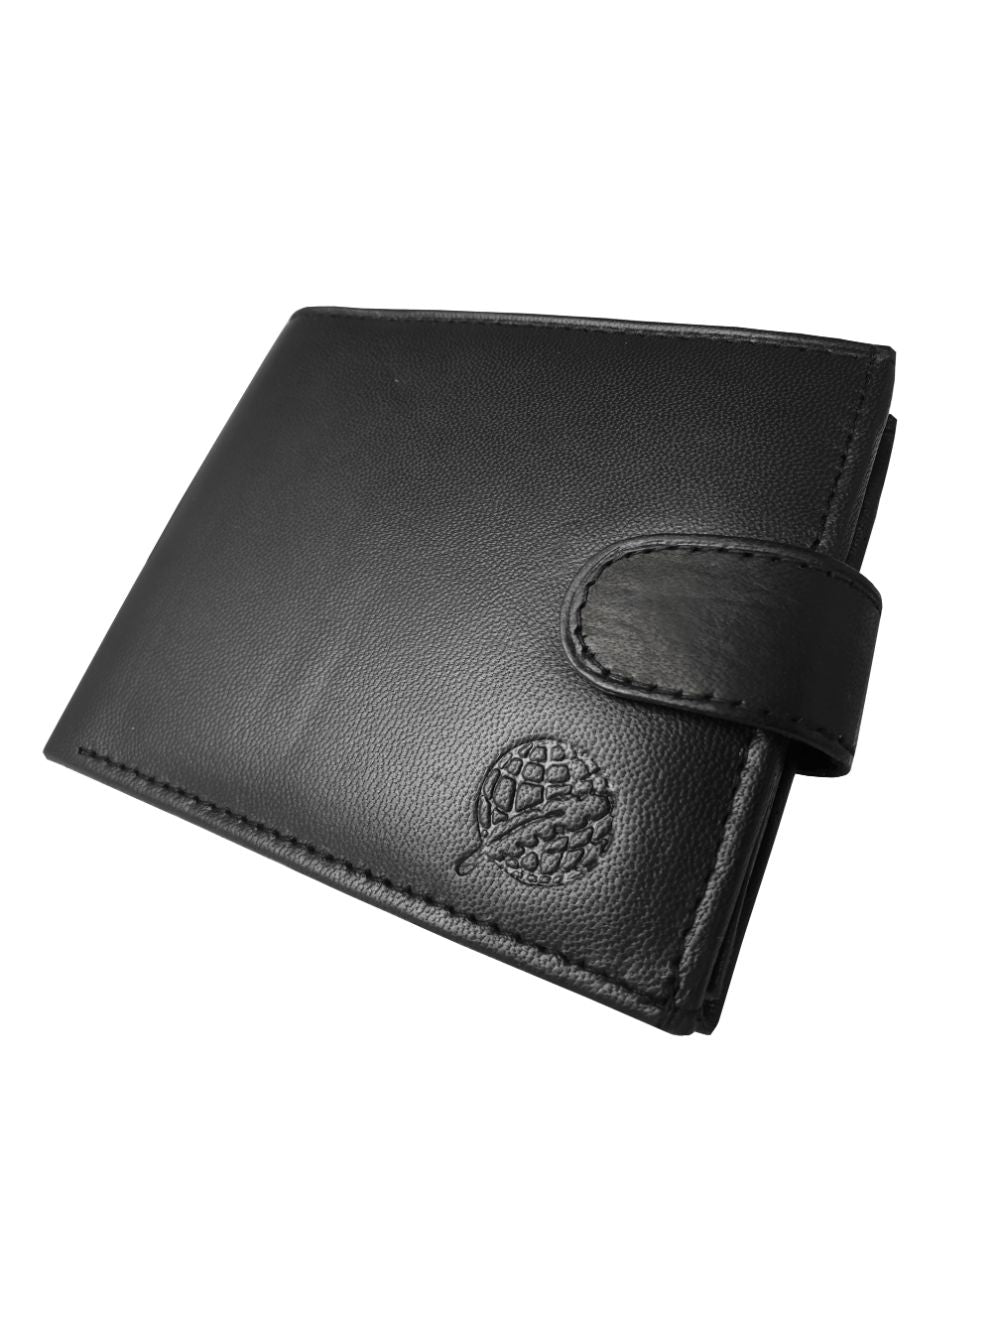 Brown Flower Zippy Wallet With Keychain Genuine Leather Designer Classic  Zipped Coin Purse For Women And Men From Taotao667, $5.08 | DHgate.Com